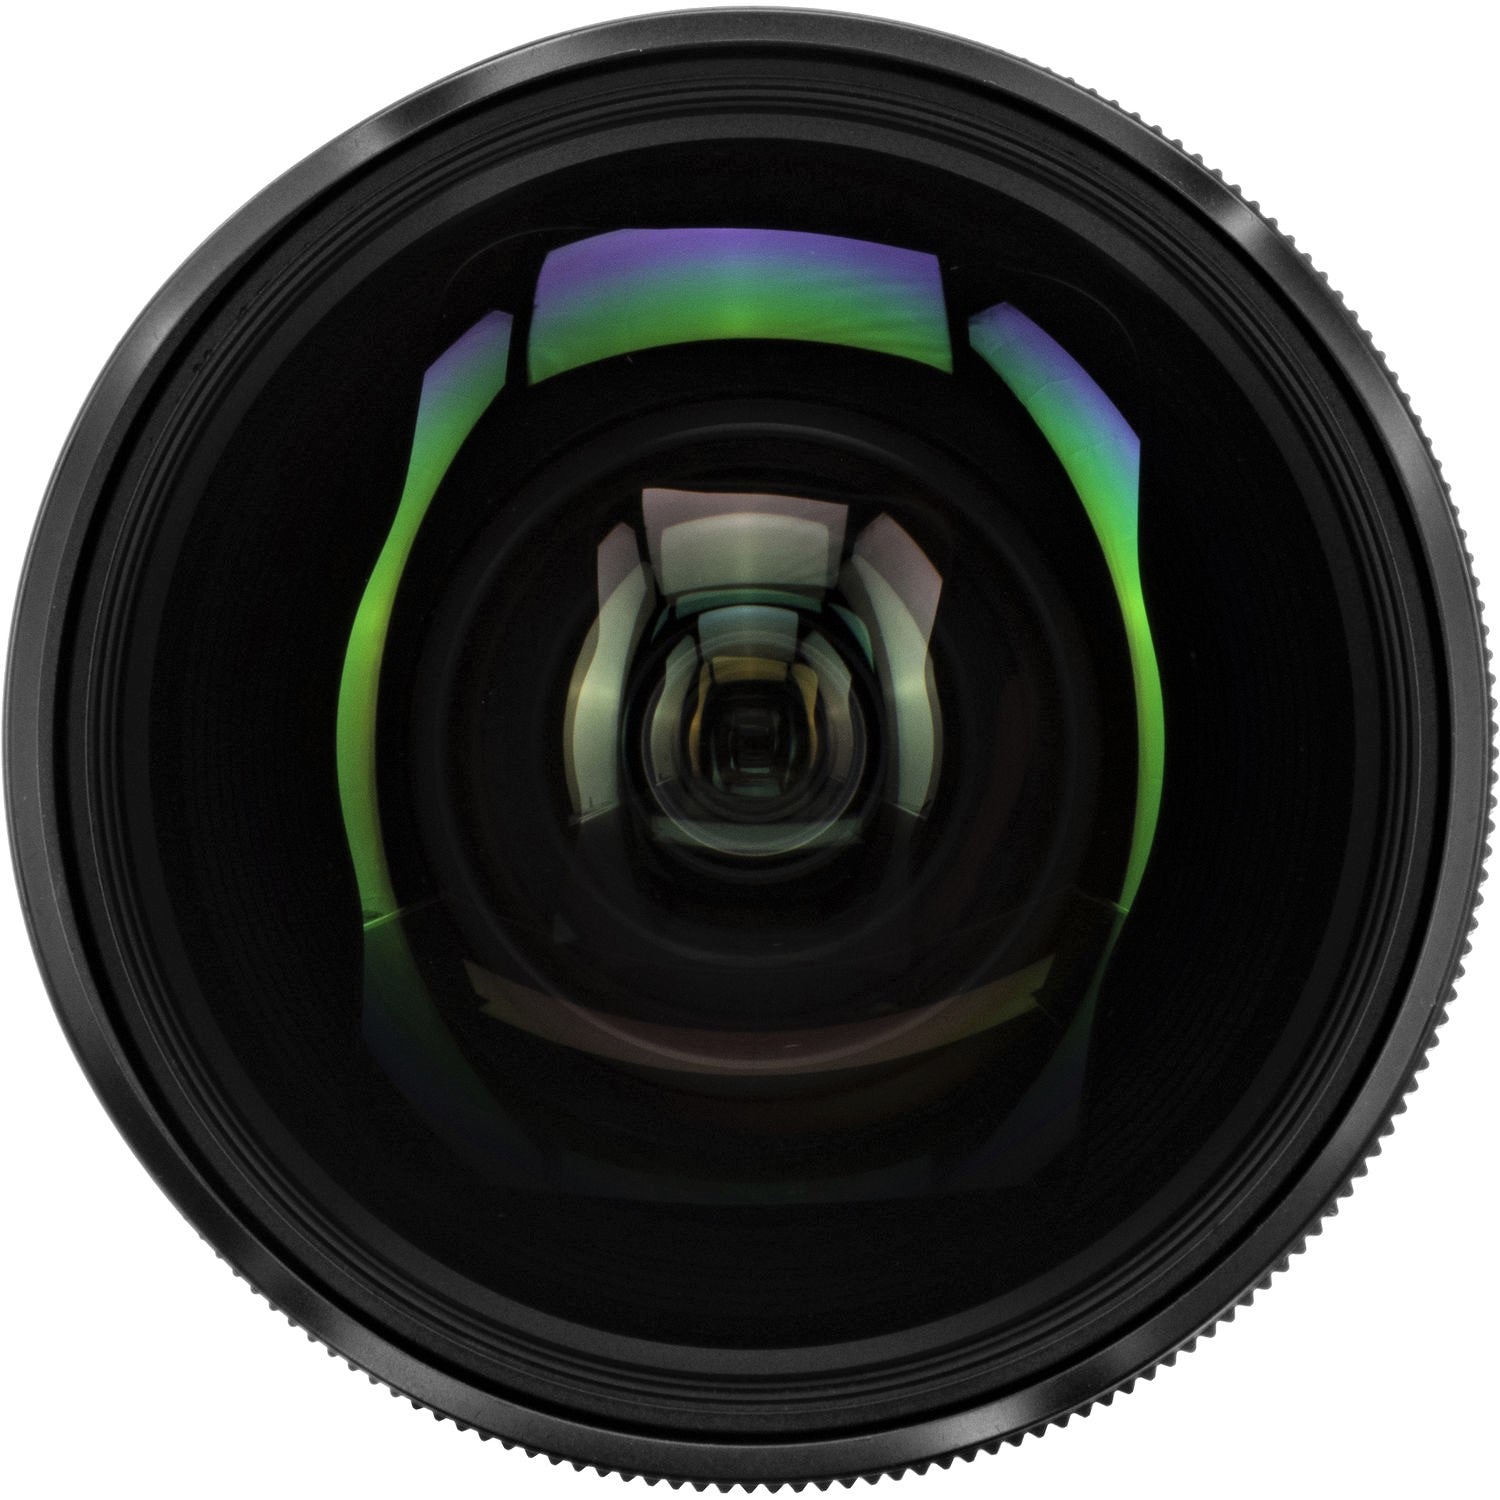 Sigma 14mm F1.8 DG HSM Art Lens for Sony E in a Front Close-Up View